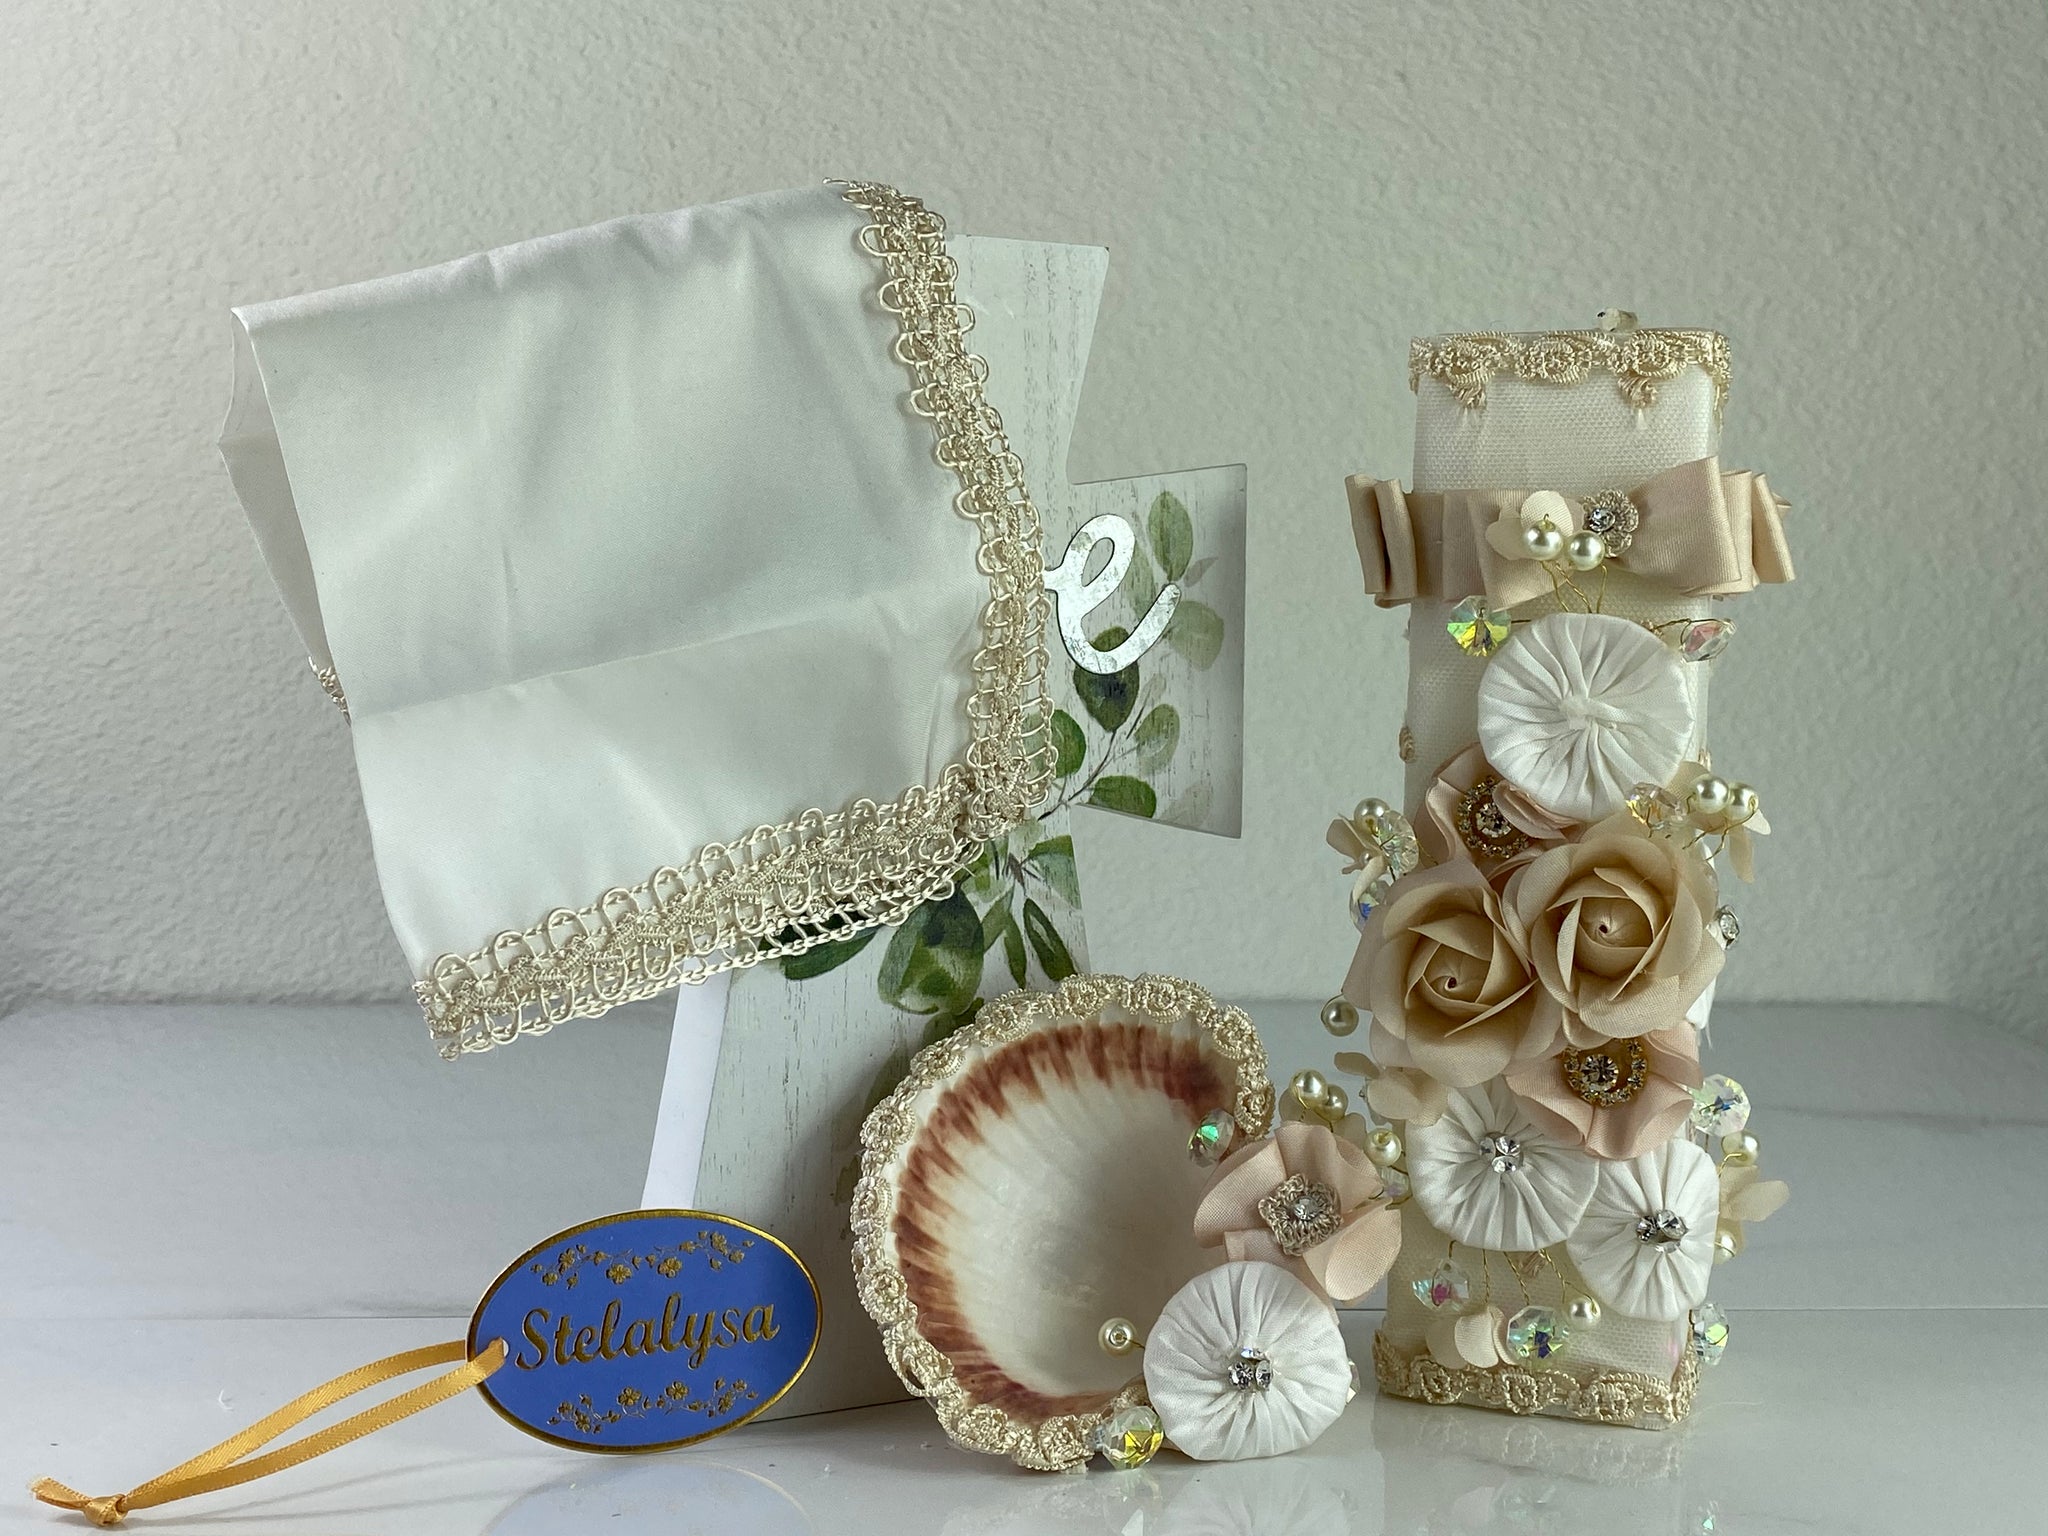 These one-of-a-kind Candle set is handmade and ivory in color.  This candle can also be use with a white baptism outfit because it has an array of light colors including white.   It is uniquely decorated with ribbon, pearls, crystals, flowers, and beads making it a gorgeous keepsake.   This candle is square in shape.    To match, the Shell is put together piece by piece to compliment the Candle and Handkerchief.  